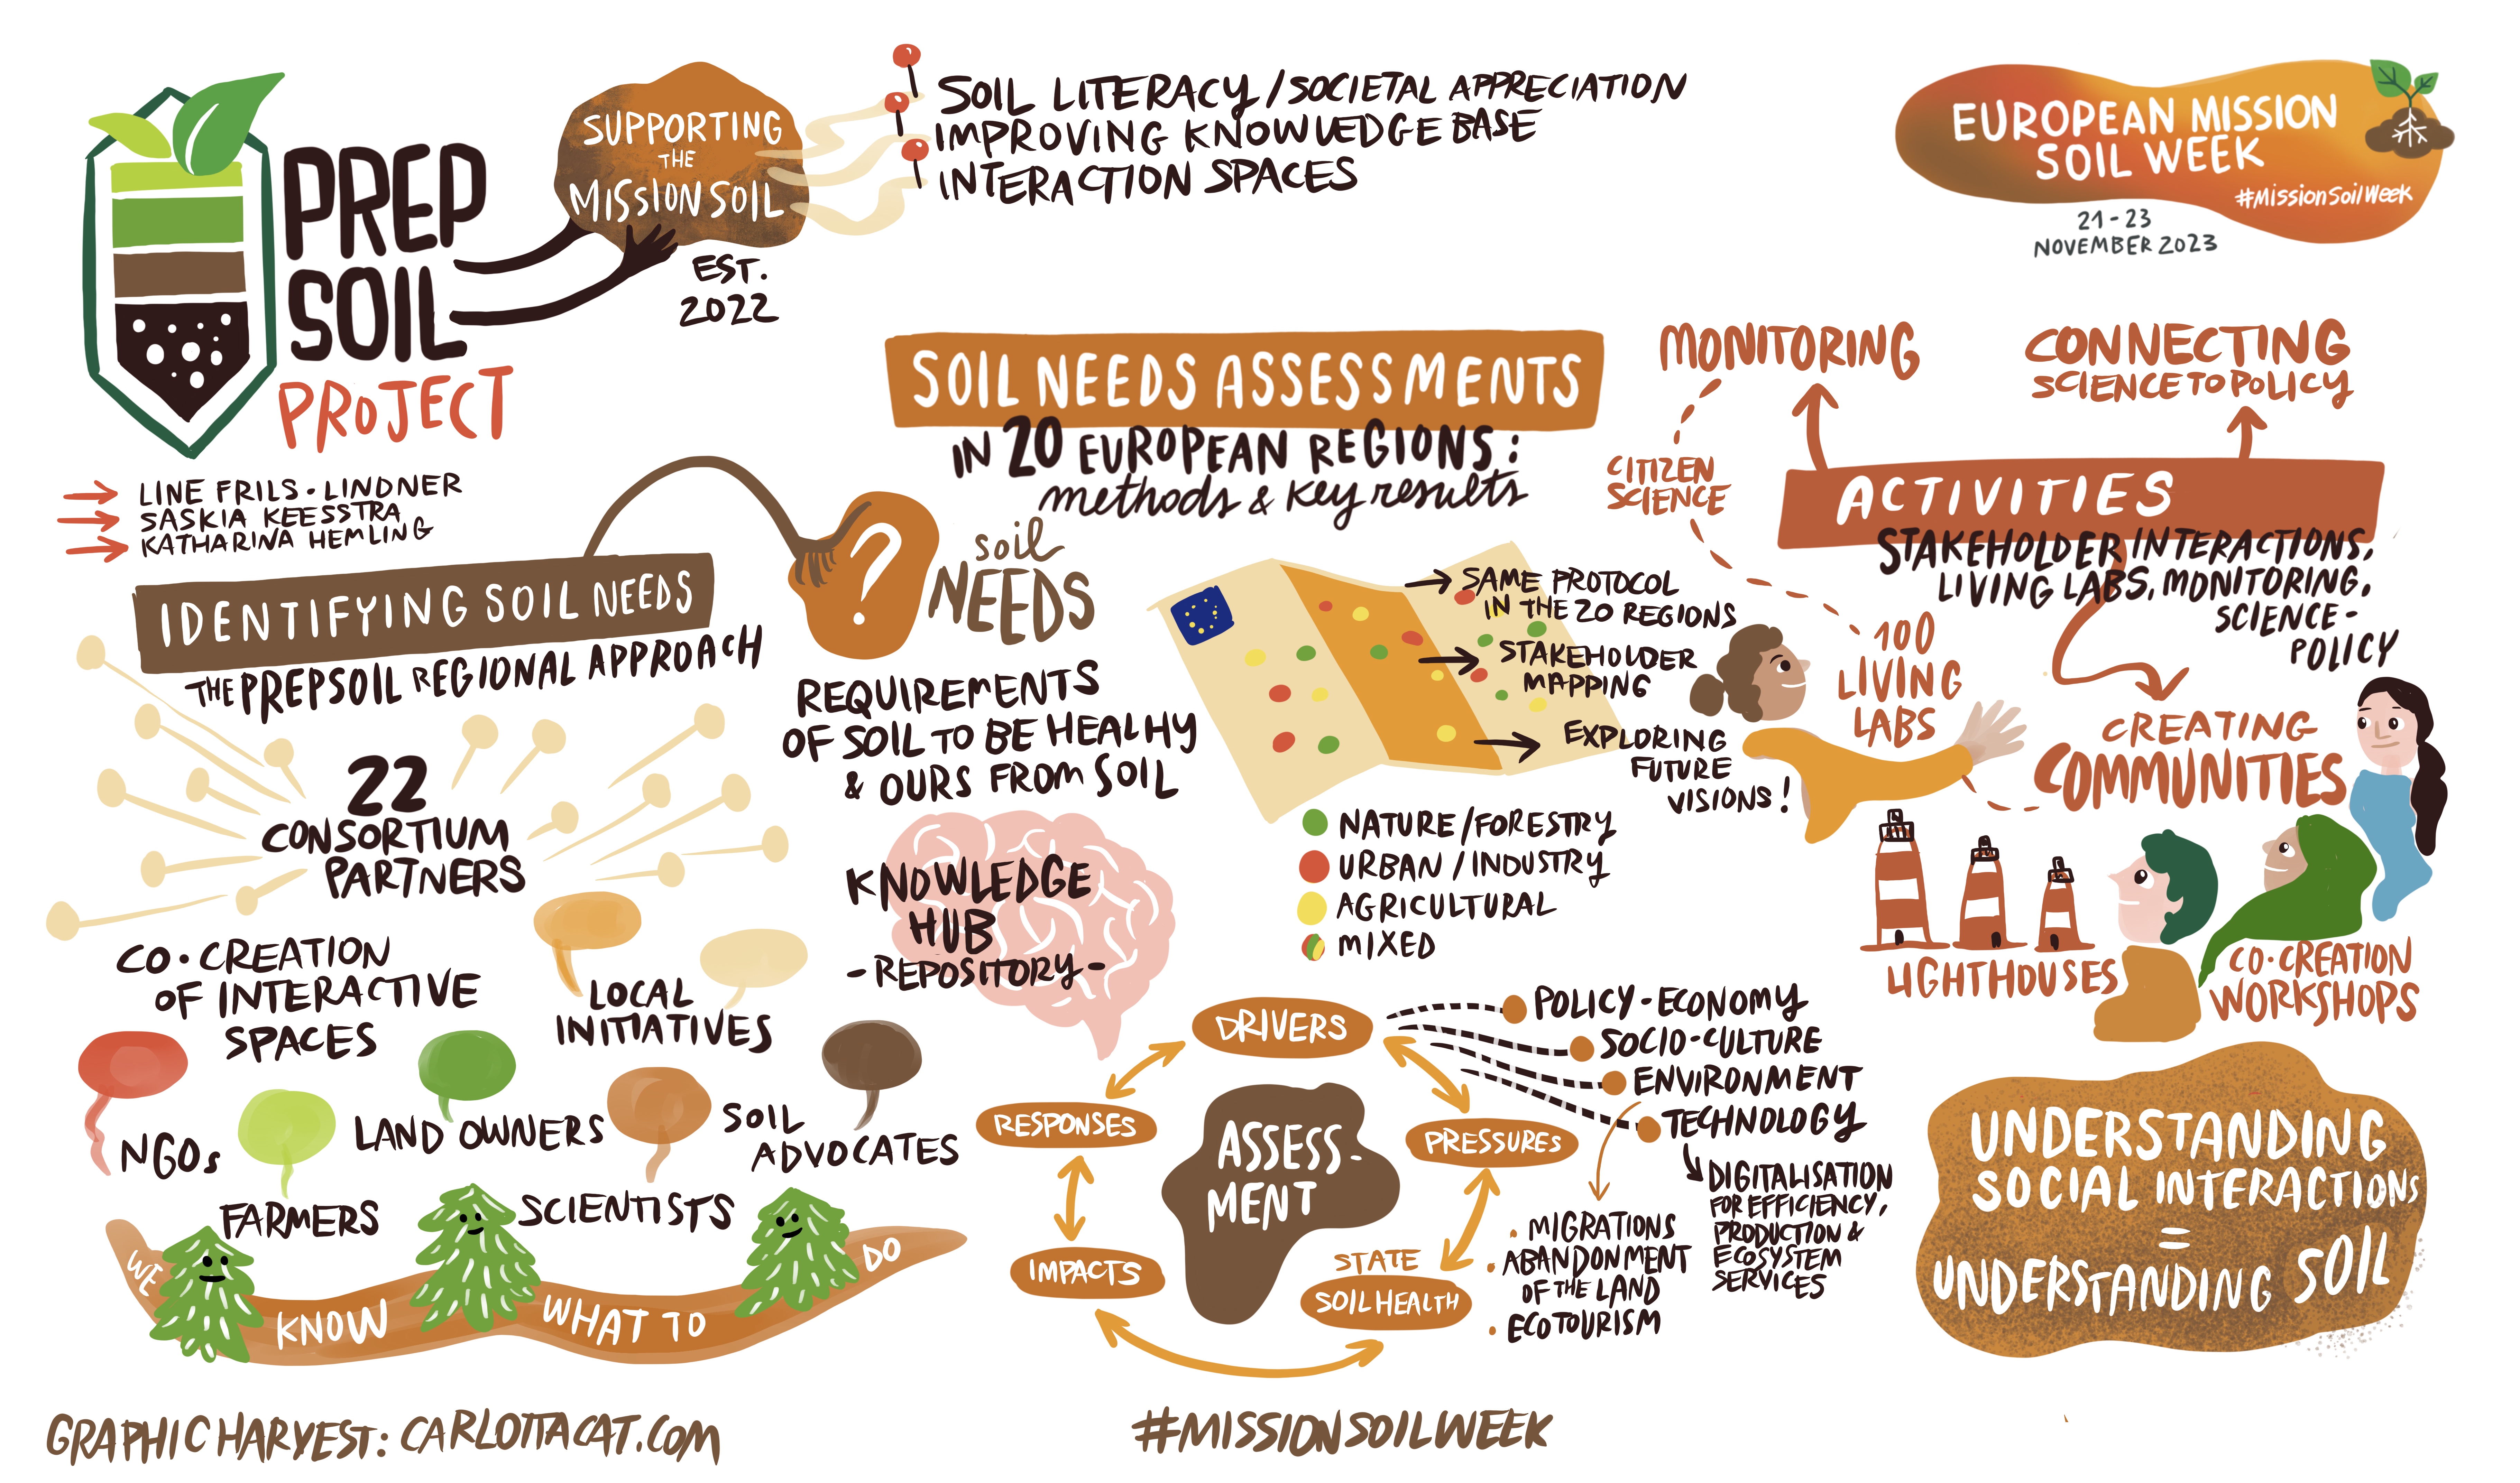 PREPSOIL Graphic Recording of the "PREPSOIL project : supporting the Mission Soil" session